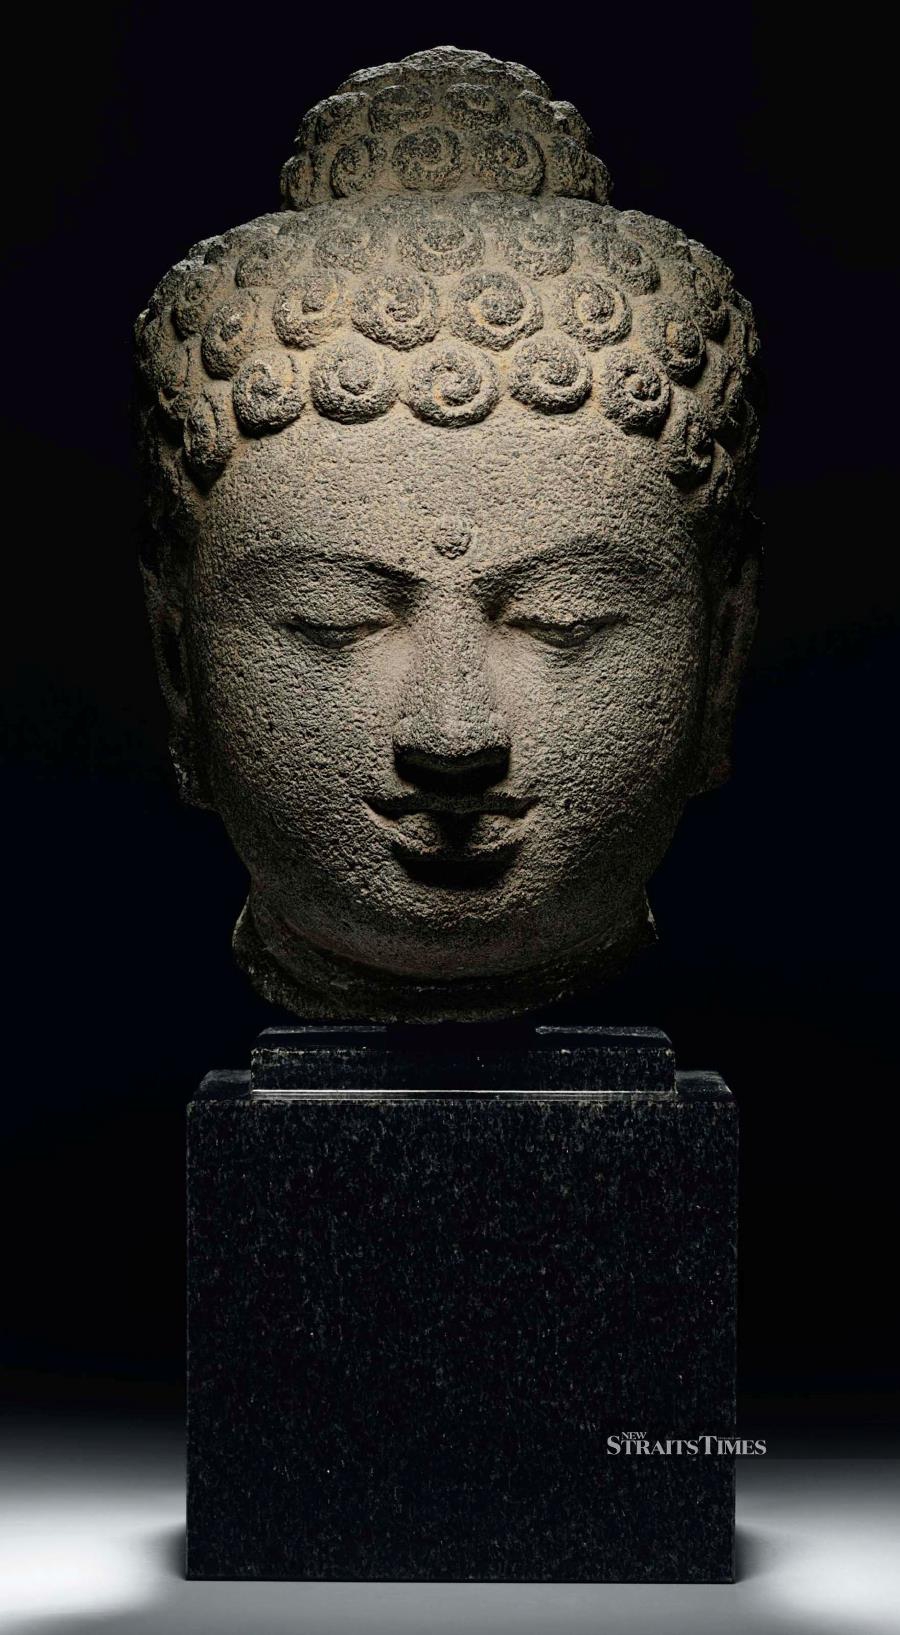  Sculptures from Borobudur are a common sight in museums and auction houses.